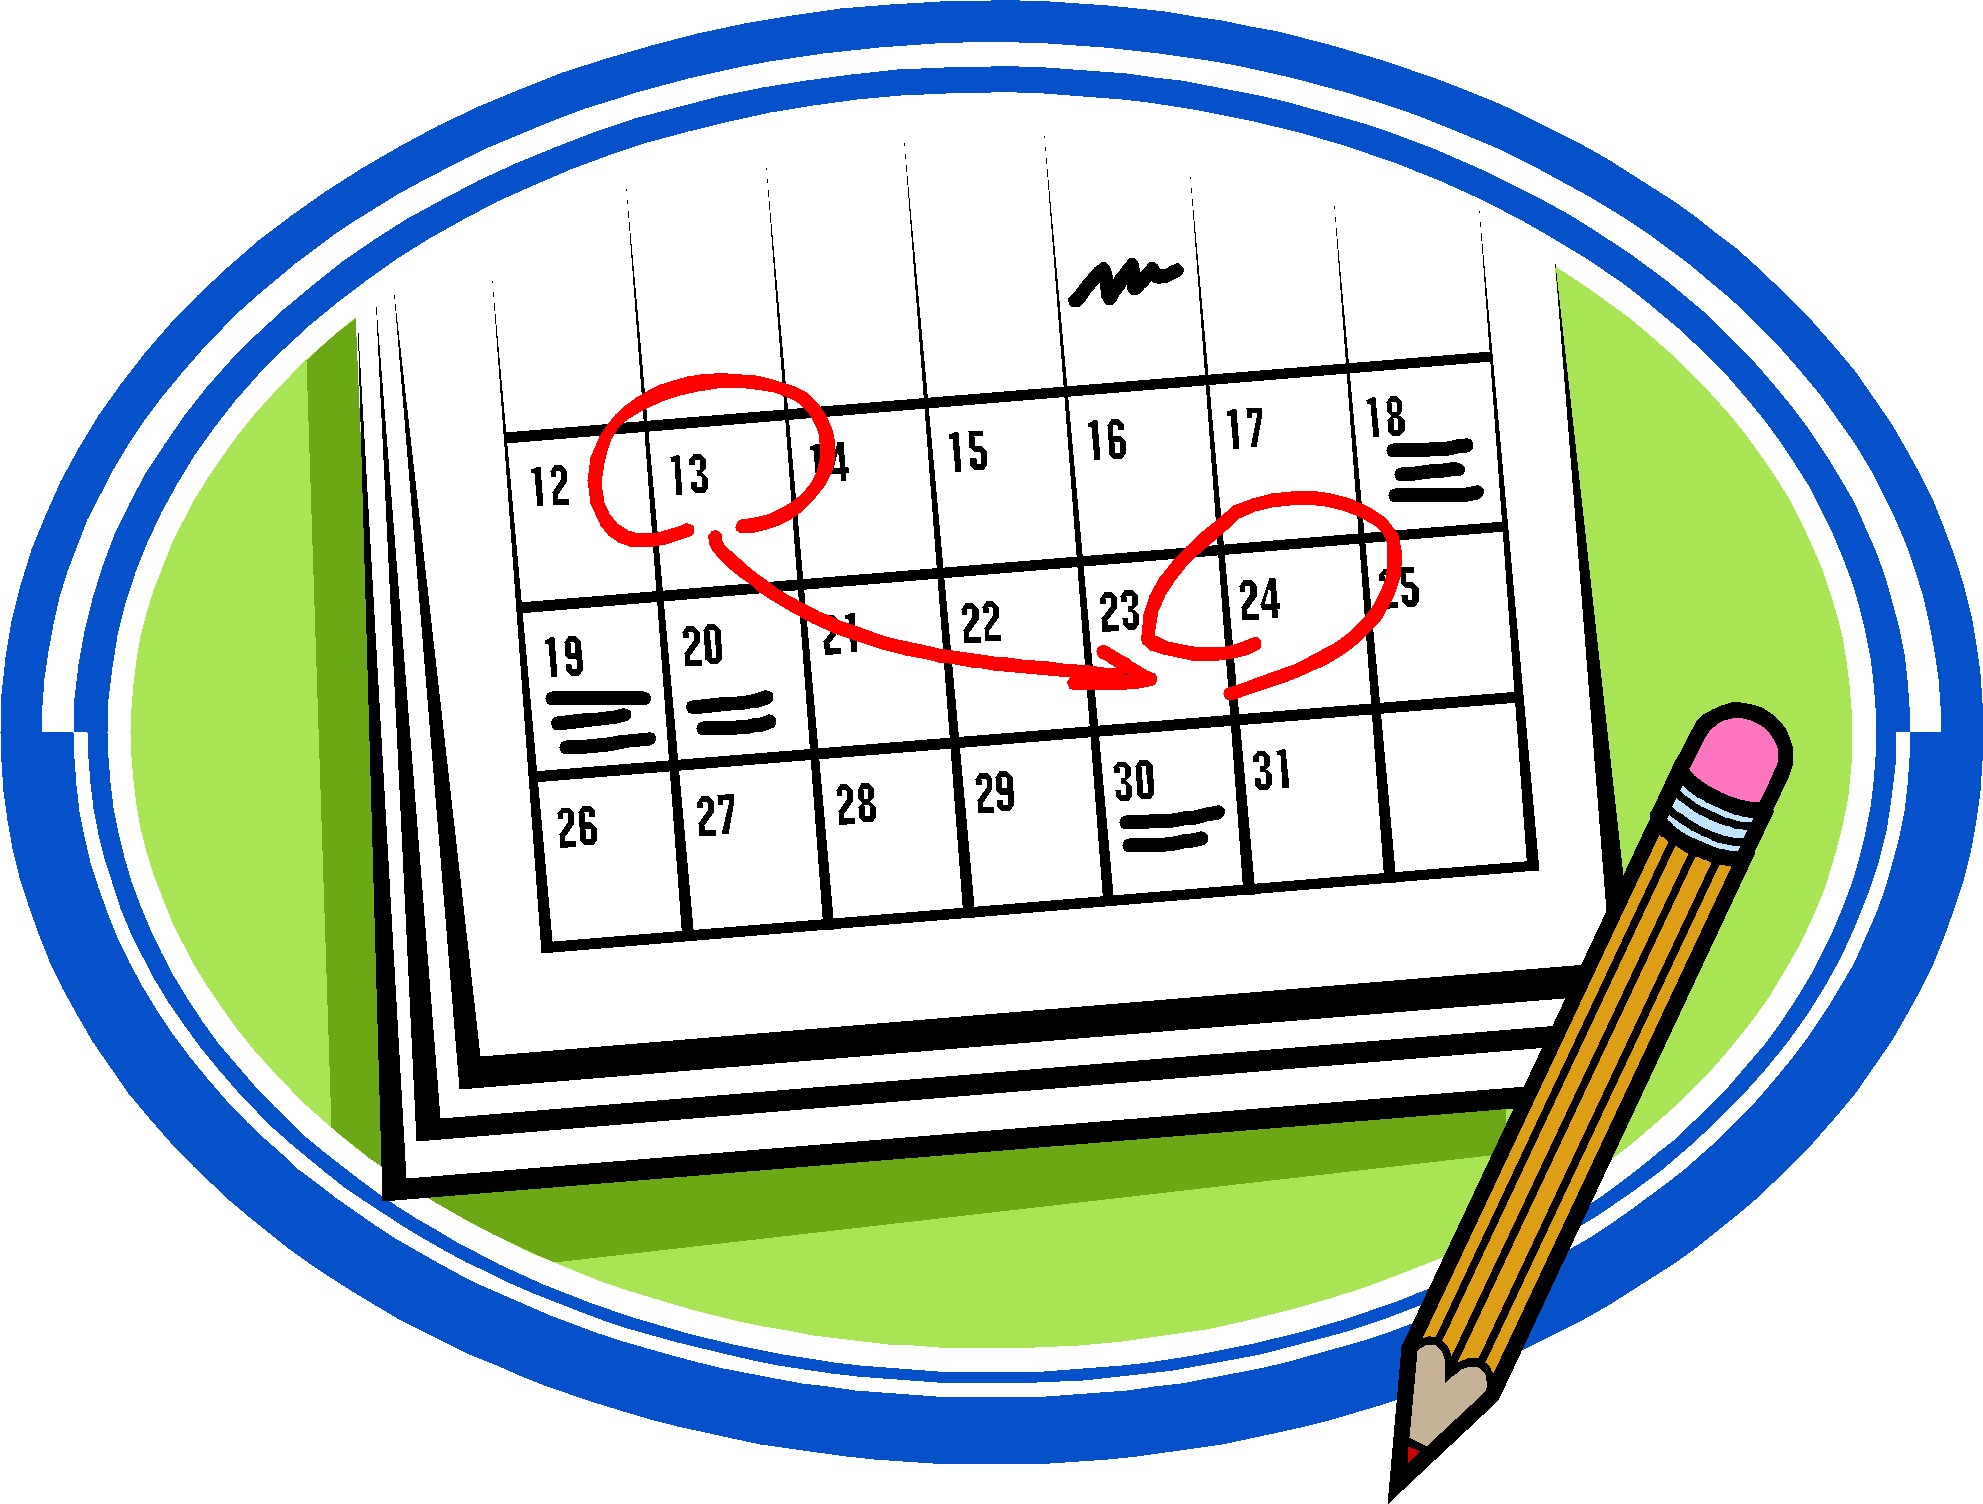 Clip Arts Related To : testing calendar. view all Saturday Calendar Clipart...